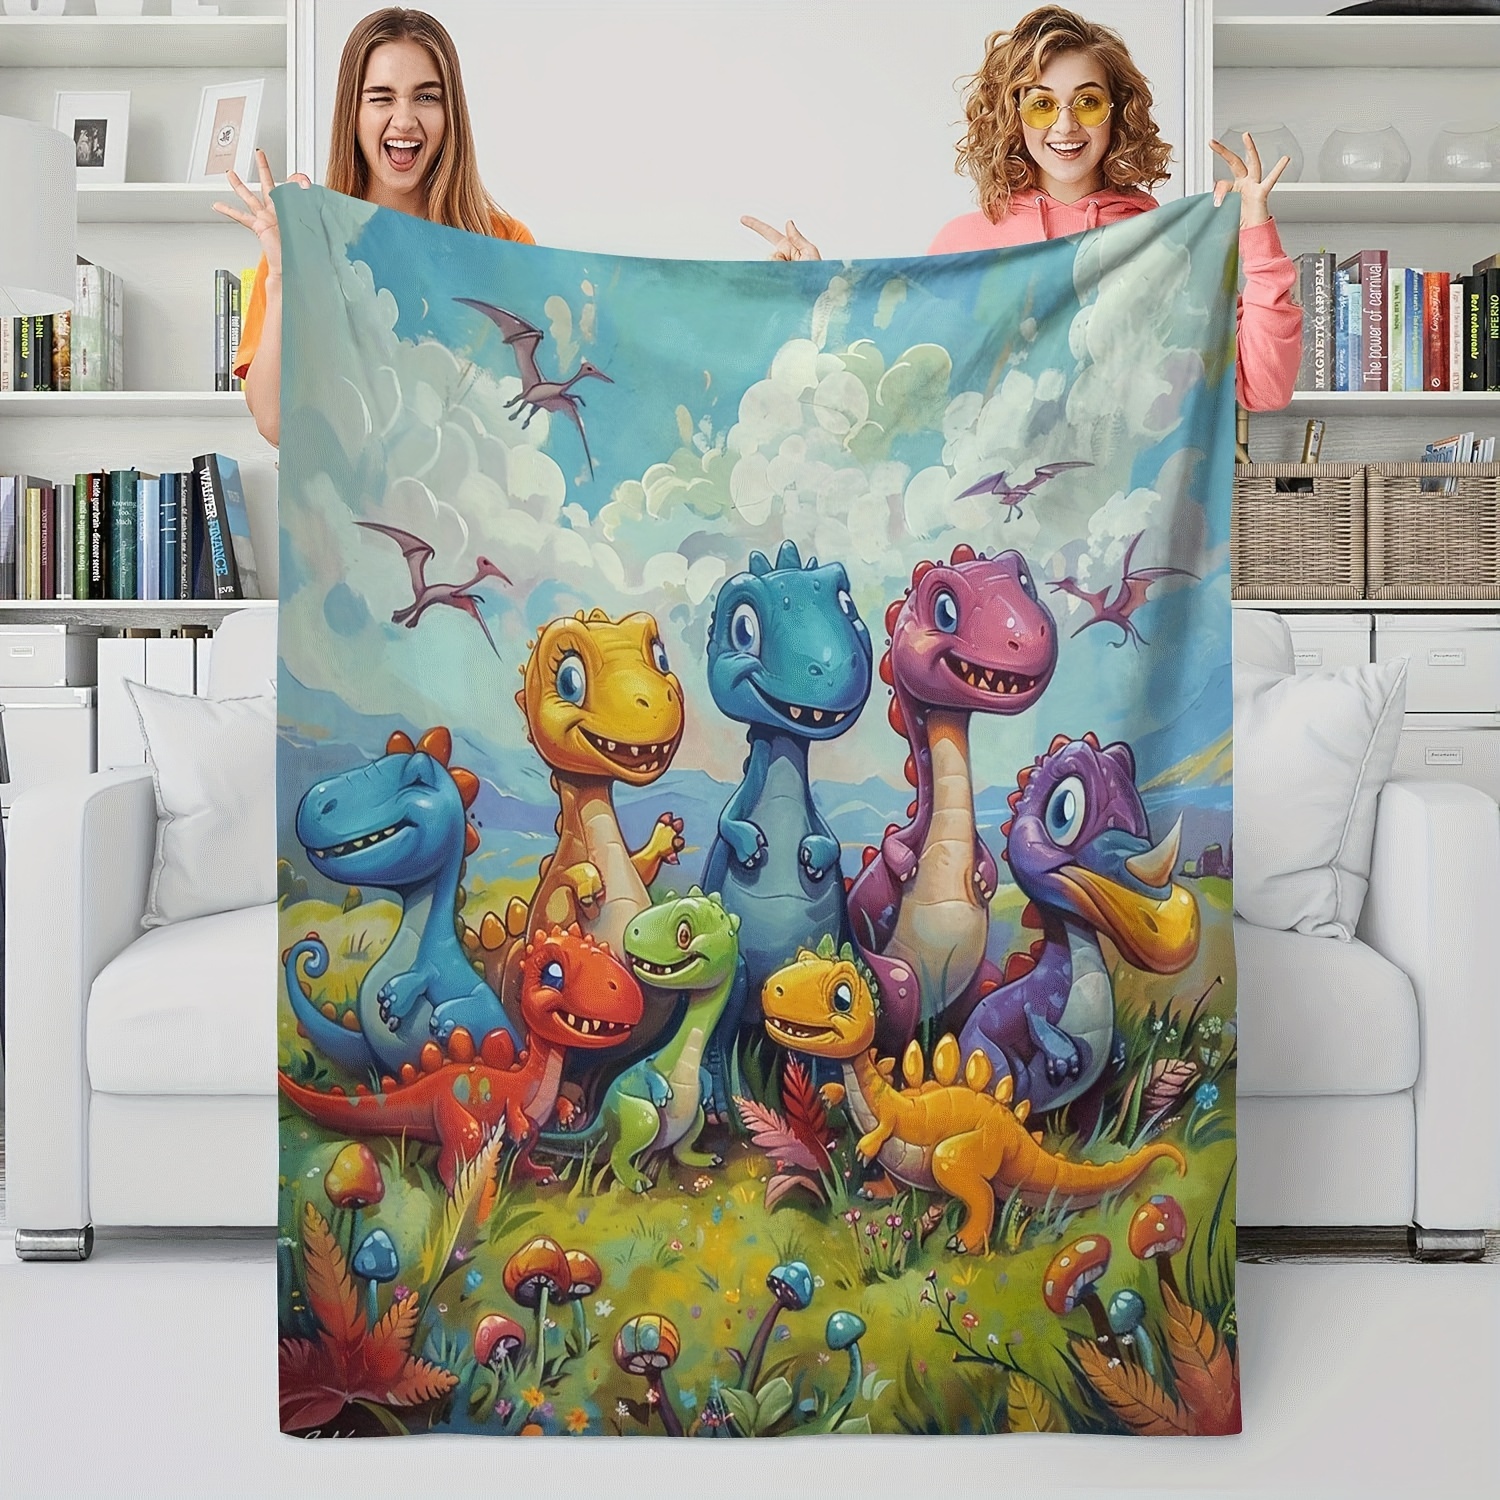 

1pc Gift Blanket For Grandson Color Cartoon Dinosaur Soft Blanket Flannel Blanket For Couch Sofa Office Bed Camping Travel, Multi-purpose Gift Blanket For All Season